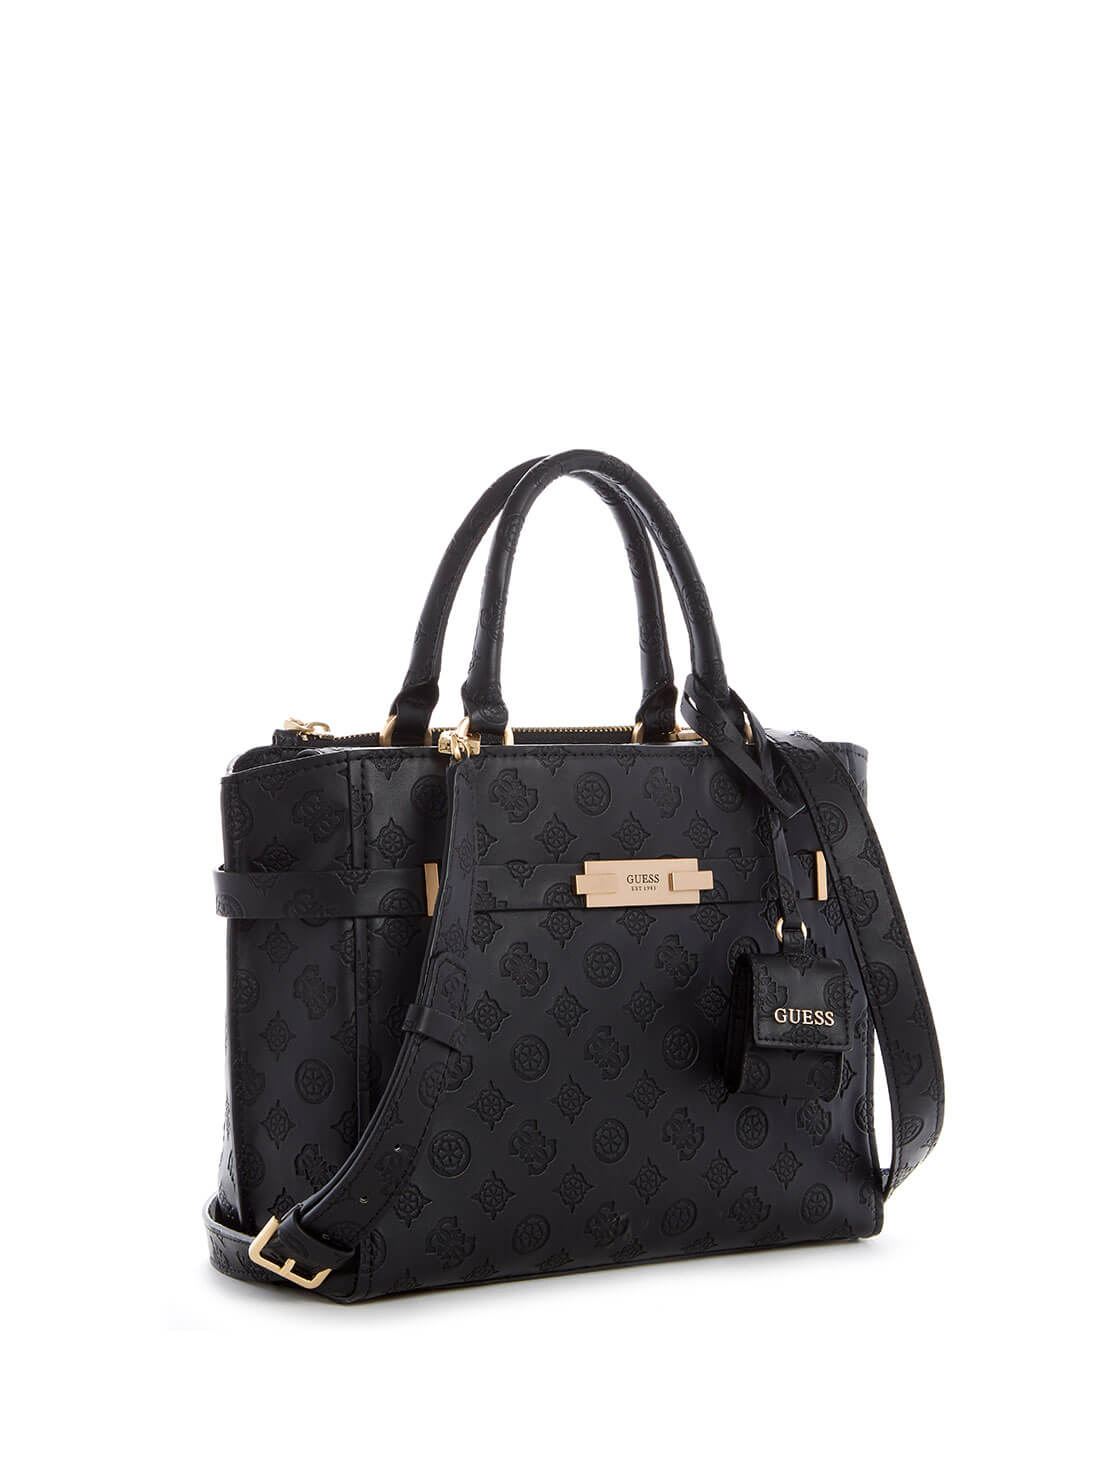 GUESS Black Bea Society Satchel Bag side view